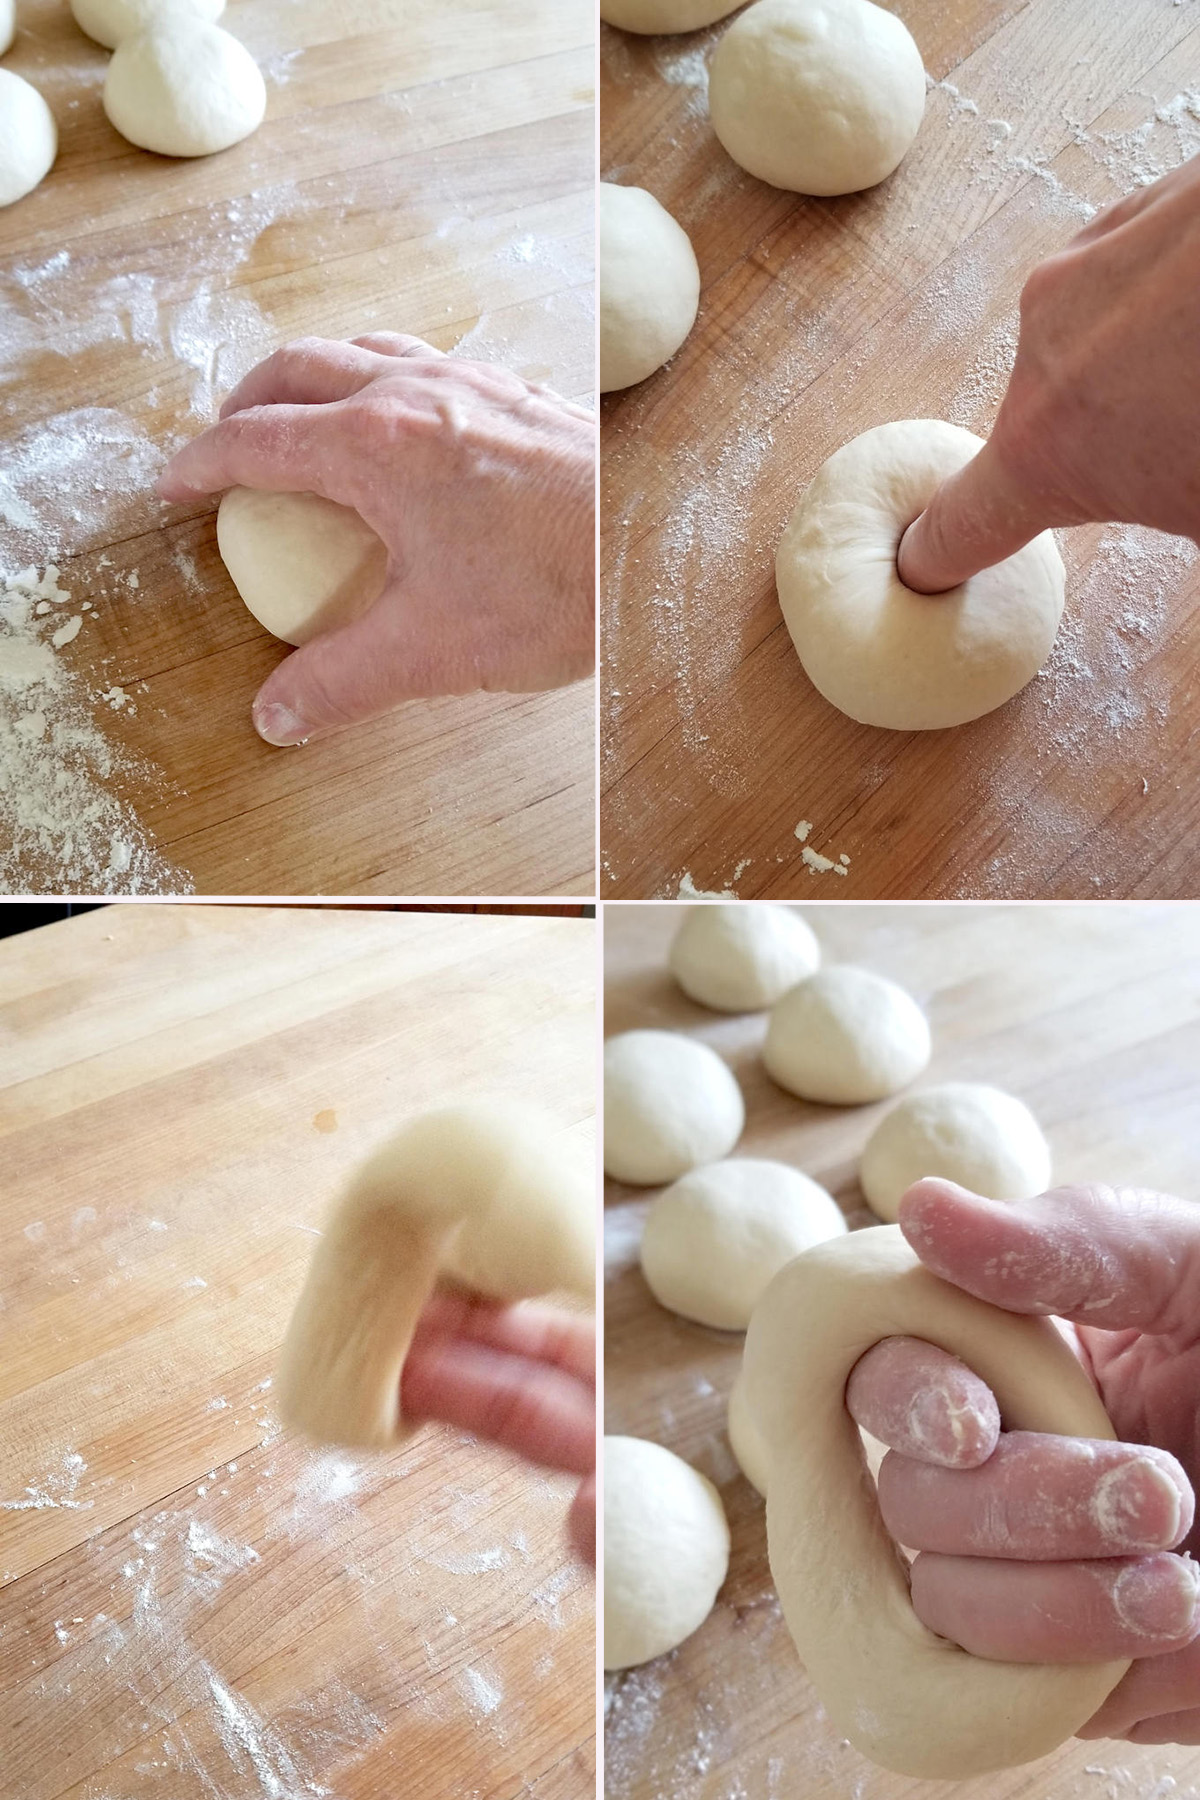 shaping a ball of dough into a bagel.